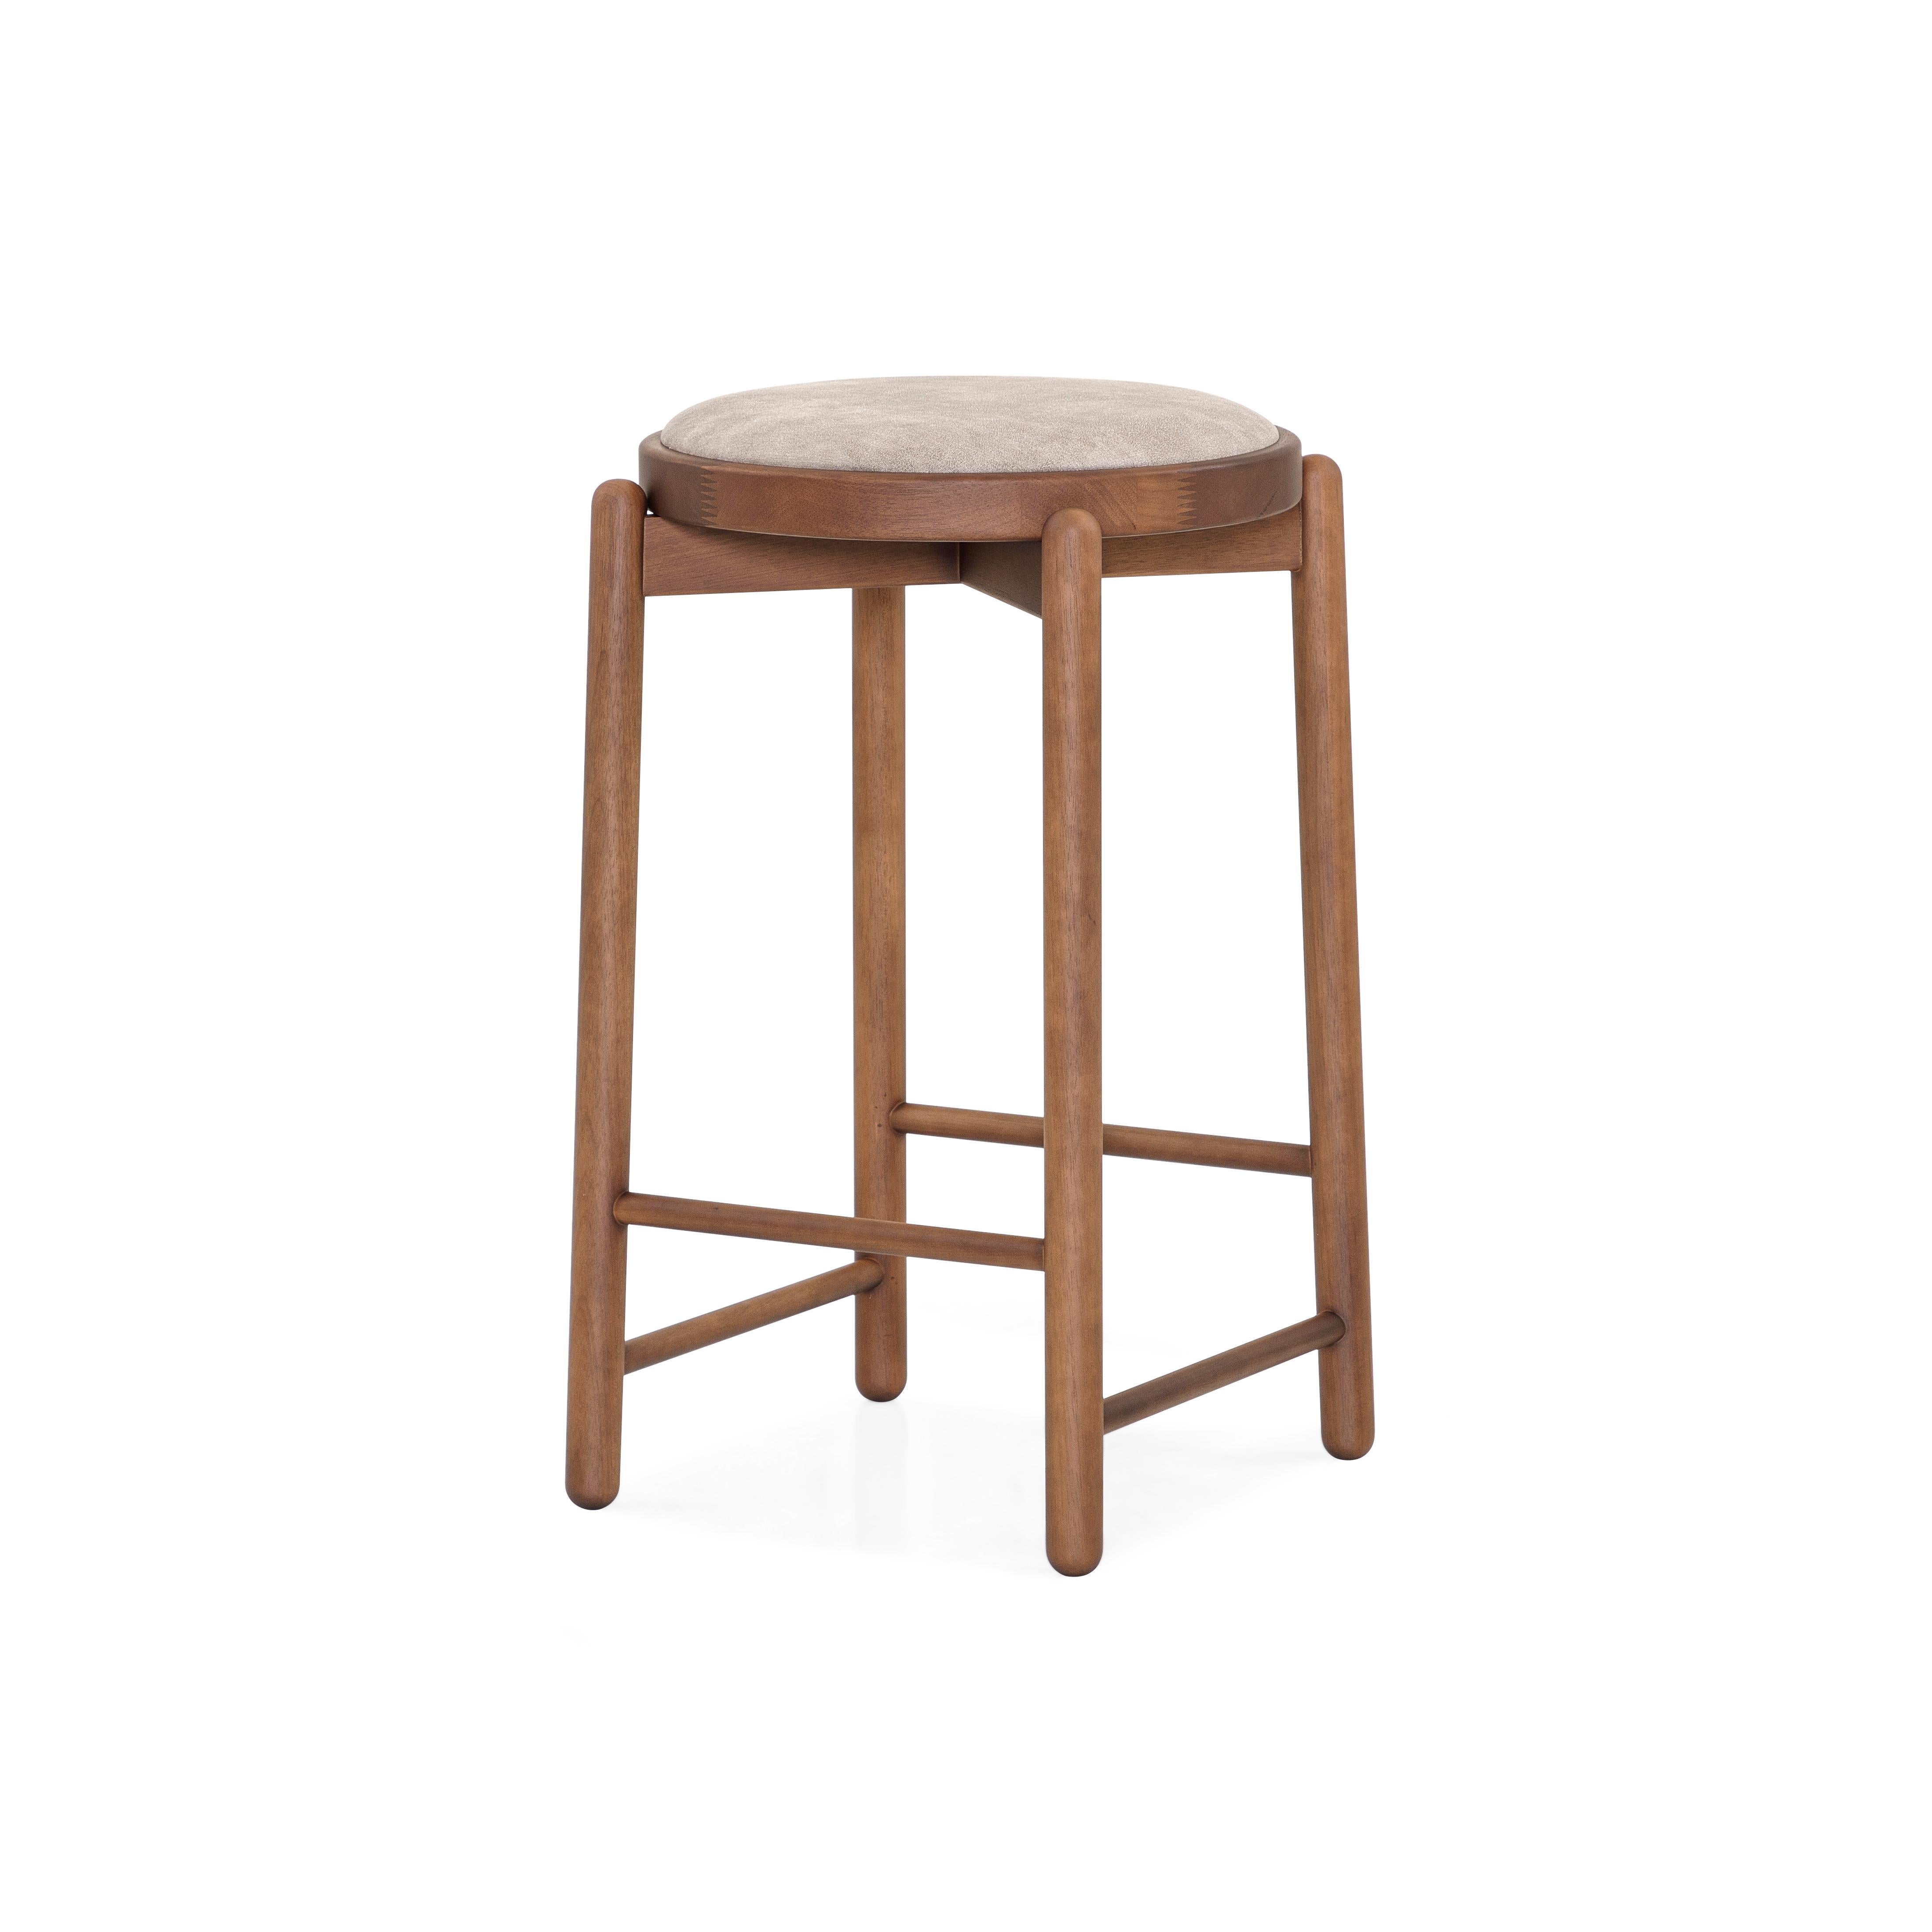 Our Uultis team has designed this Maru counter stool in a walnut wood base with a matching upholstered cushioned seat that will stop being only a decoration counter stool to become part of the day-to-day lives of those who experience enriching